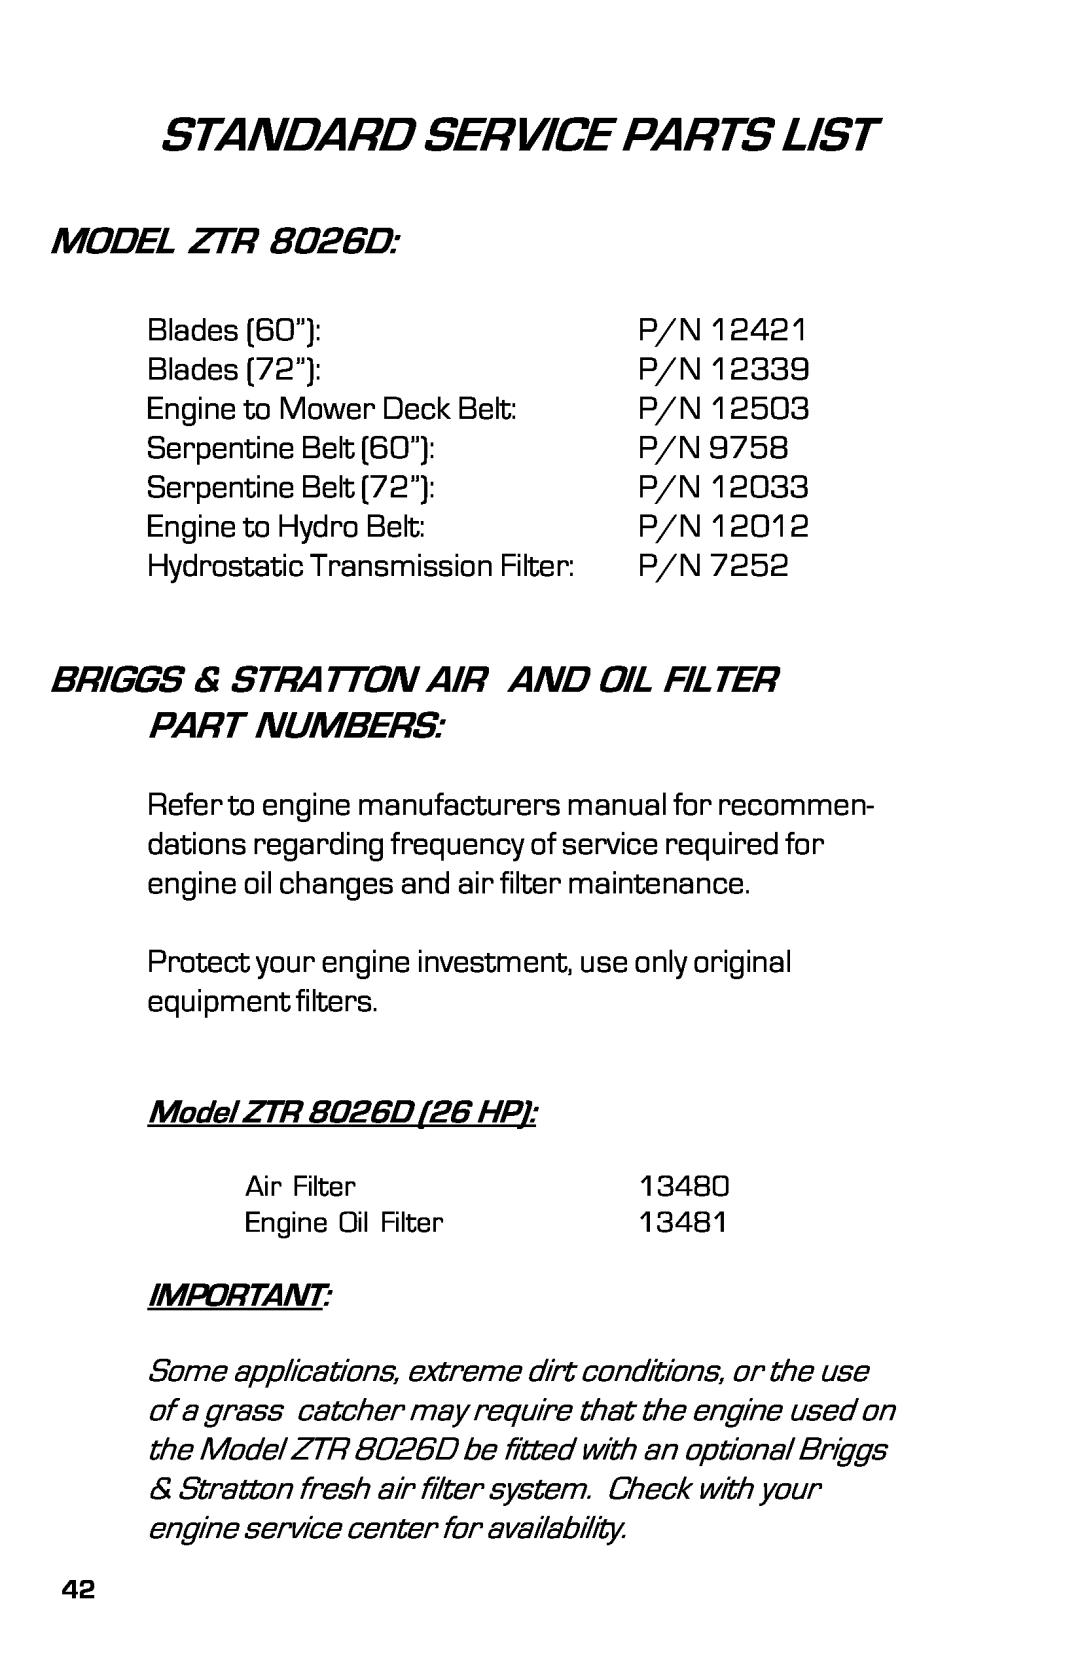 Dixon 8000D manual Standard Service Parts List, MODEL ZTR 8026D, Briggs & Stratton Air And Oil Filter Part Numbers 